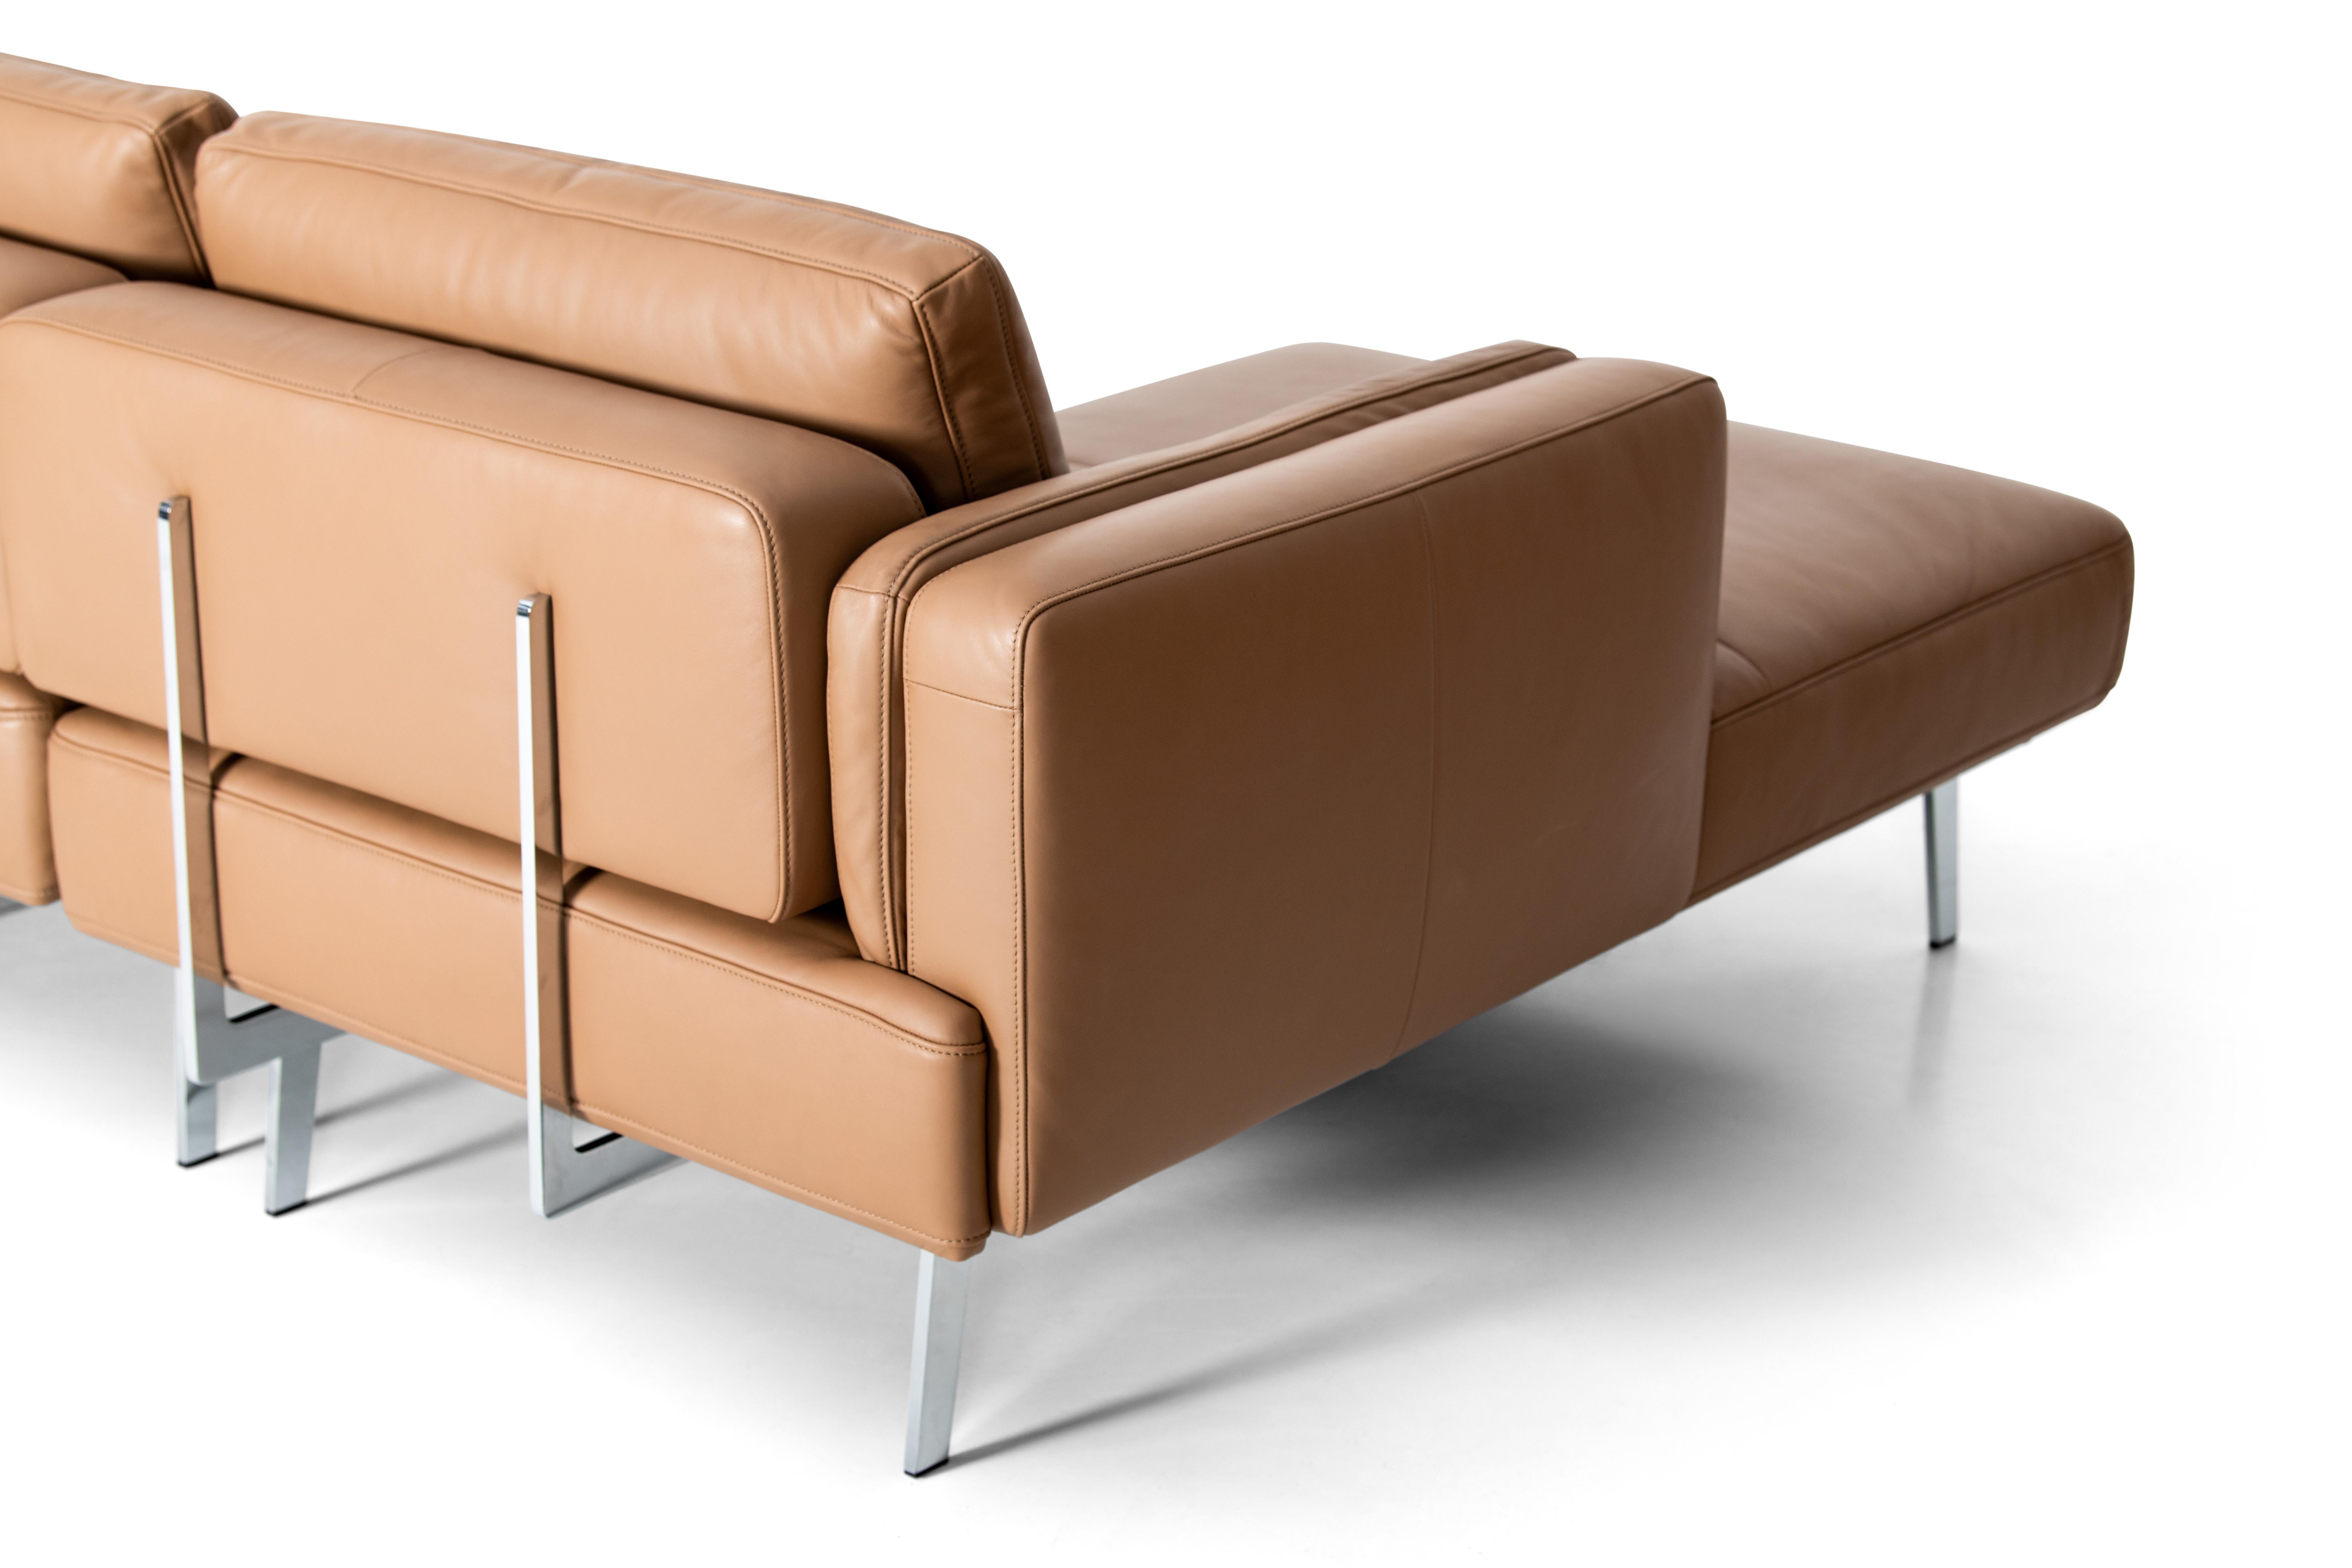 Swiss DeSede DS-747/40 Multifunctional Sofa in Noce Leather Seat and Back Upholstery For Sale